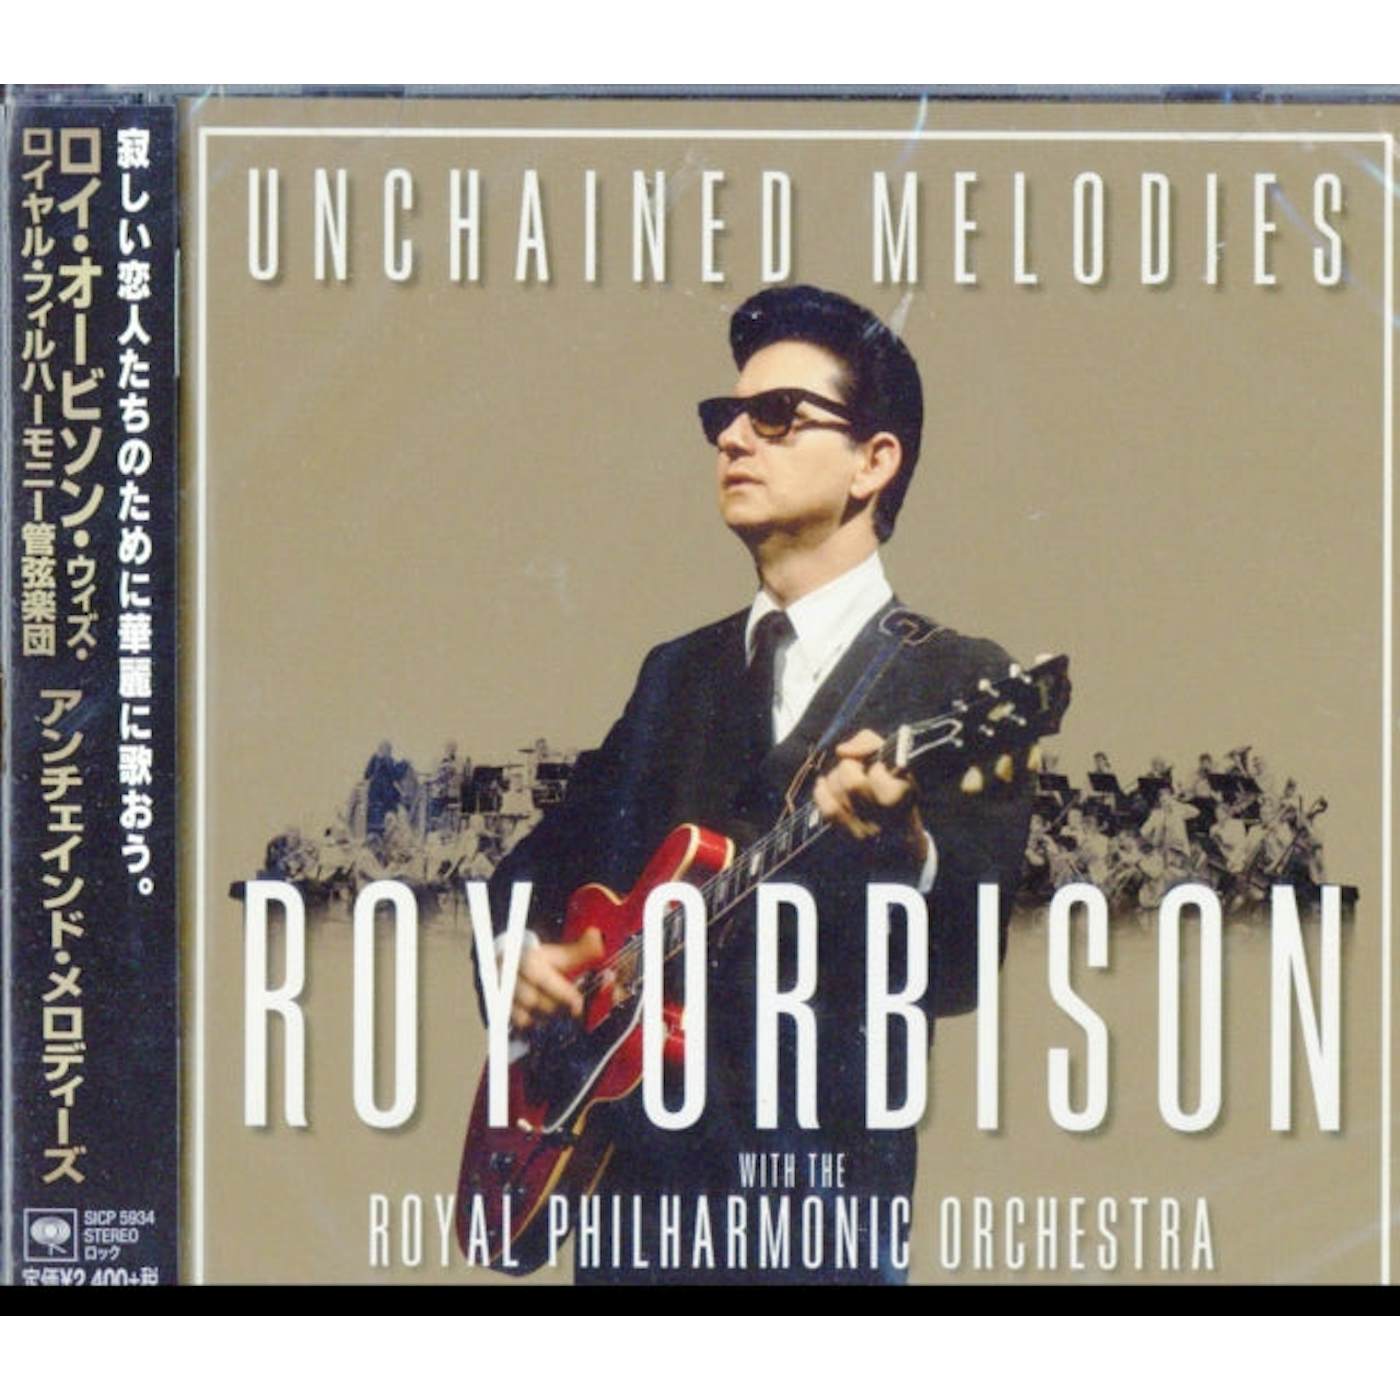 Roy Orbison CD - Unchained Melodies: Roy Orbison & The Royal Philharmonic Orchestra